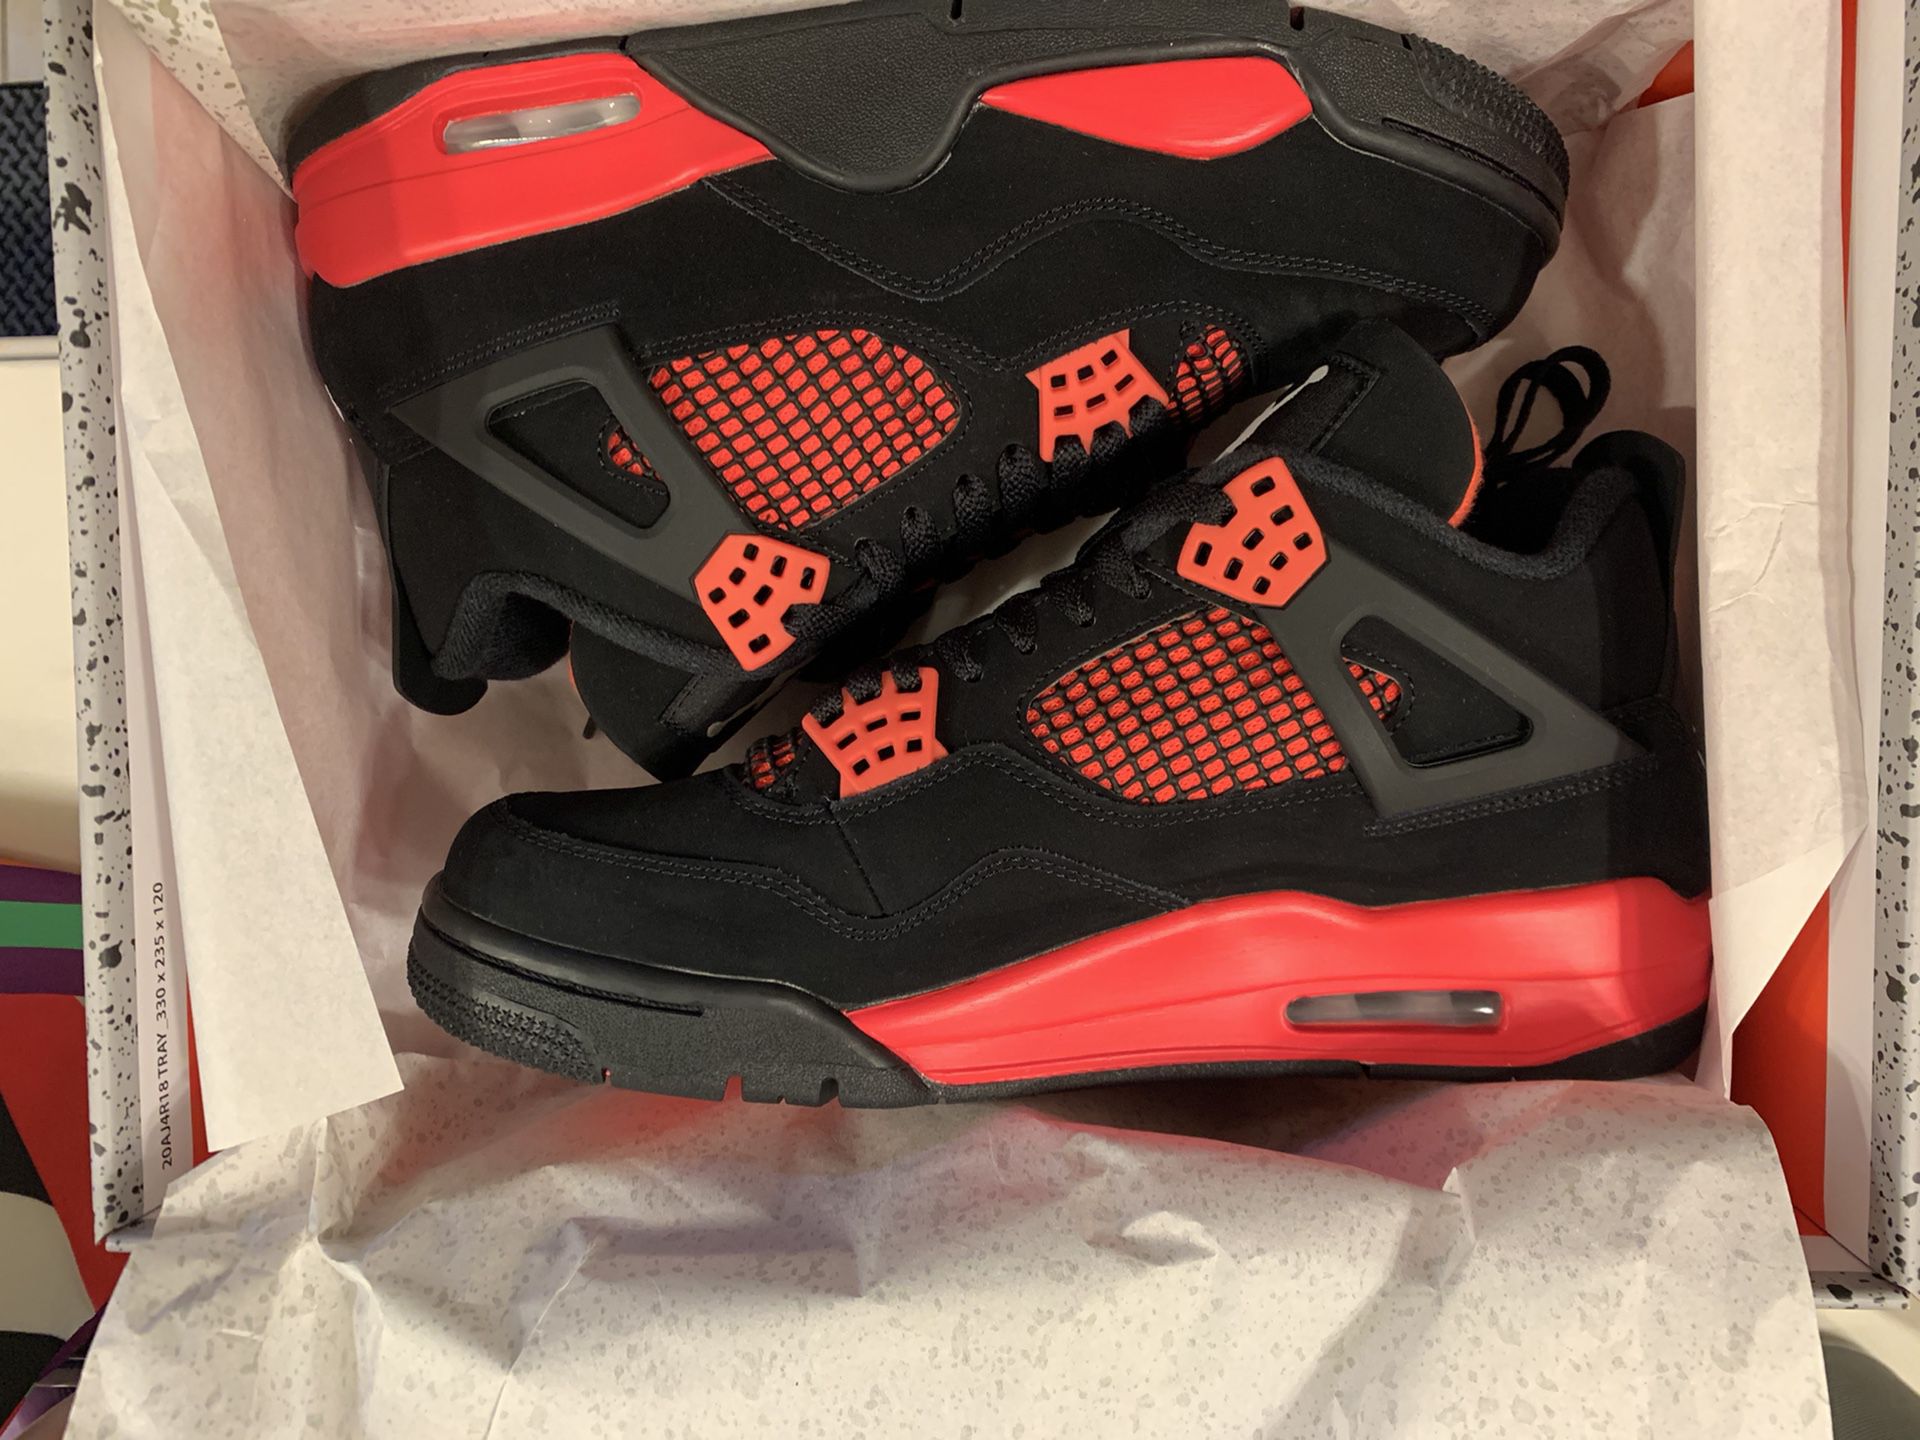 Air Jordan 4 Retro “Red Thunder” for Sale in Katy, TX - OfferUp